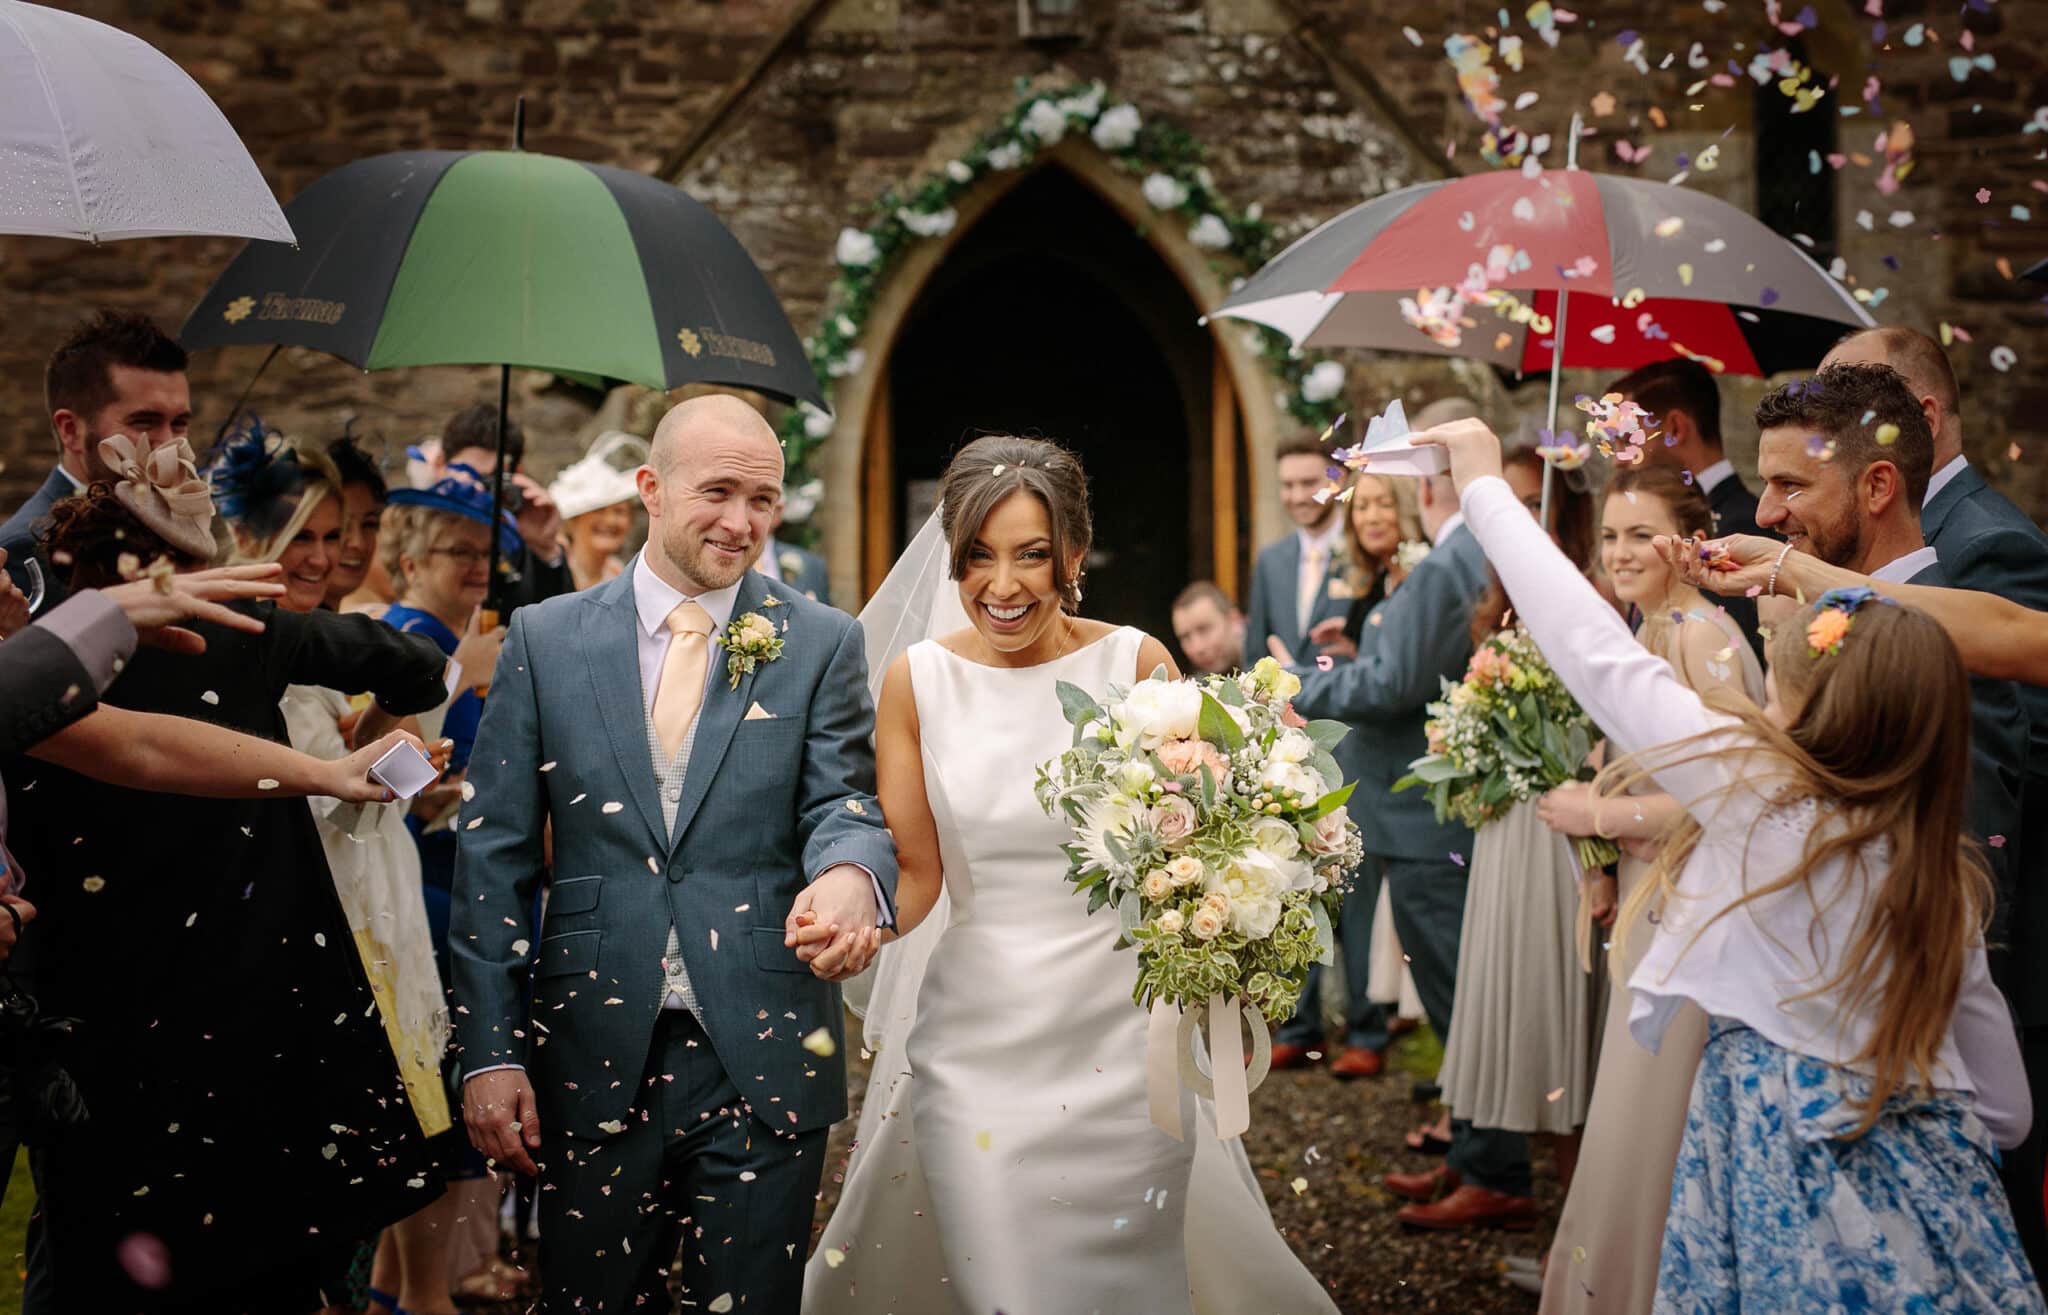 Check Out Shropshire wedding barns https://pbartworks.co.uk/wp-content/uploads/2018/01/Winstanstow-wedding-photography-2048x1315.jpg